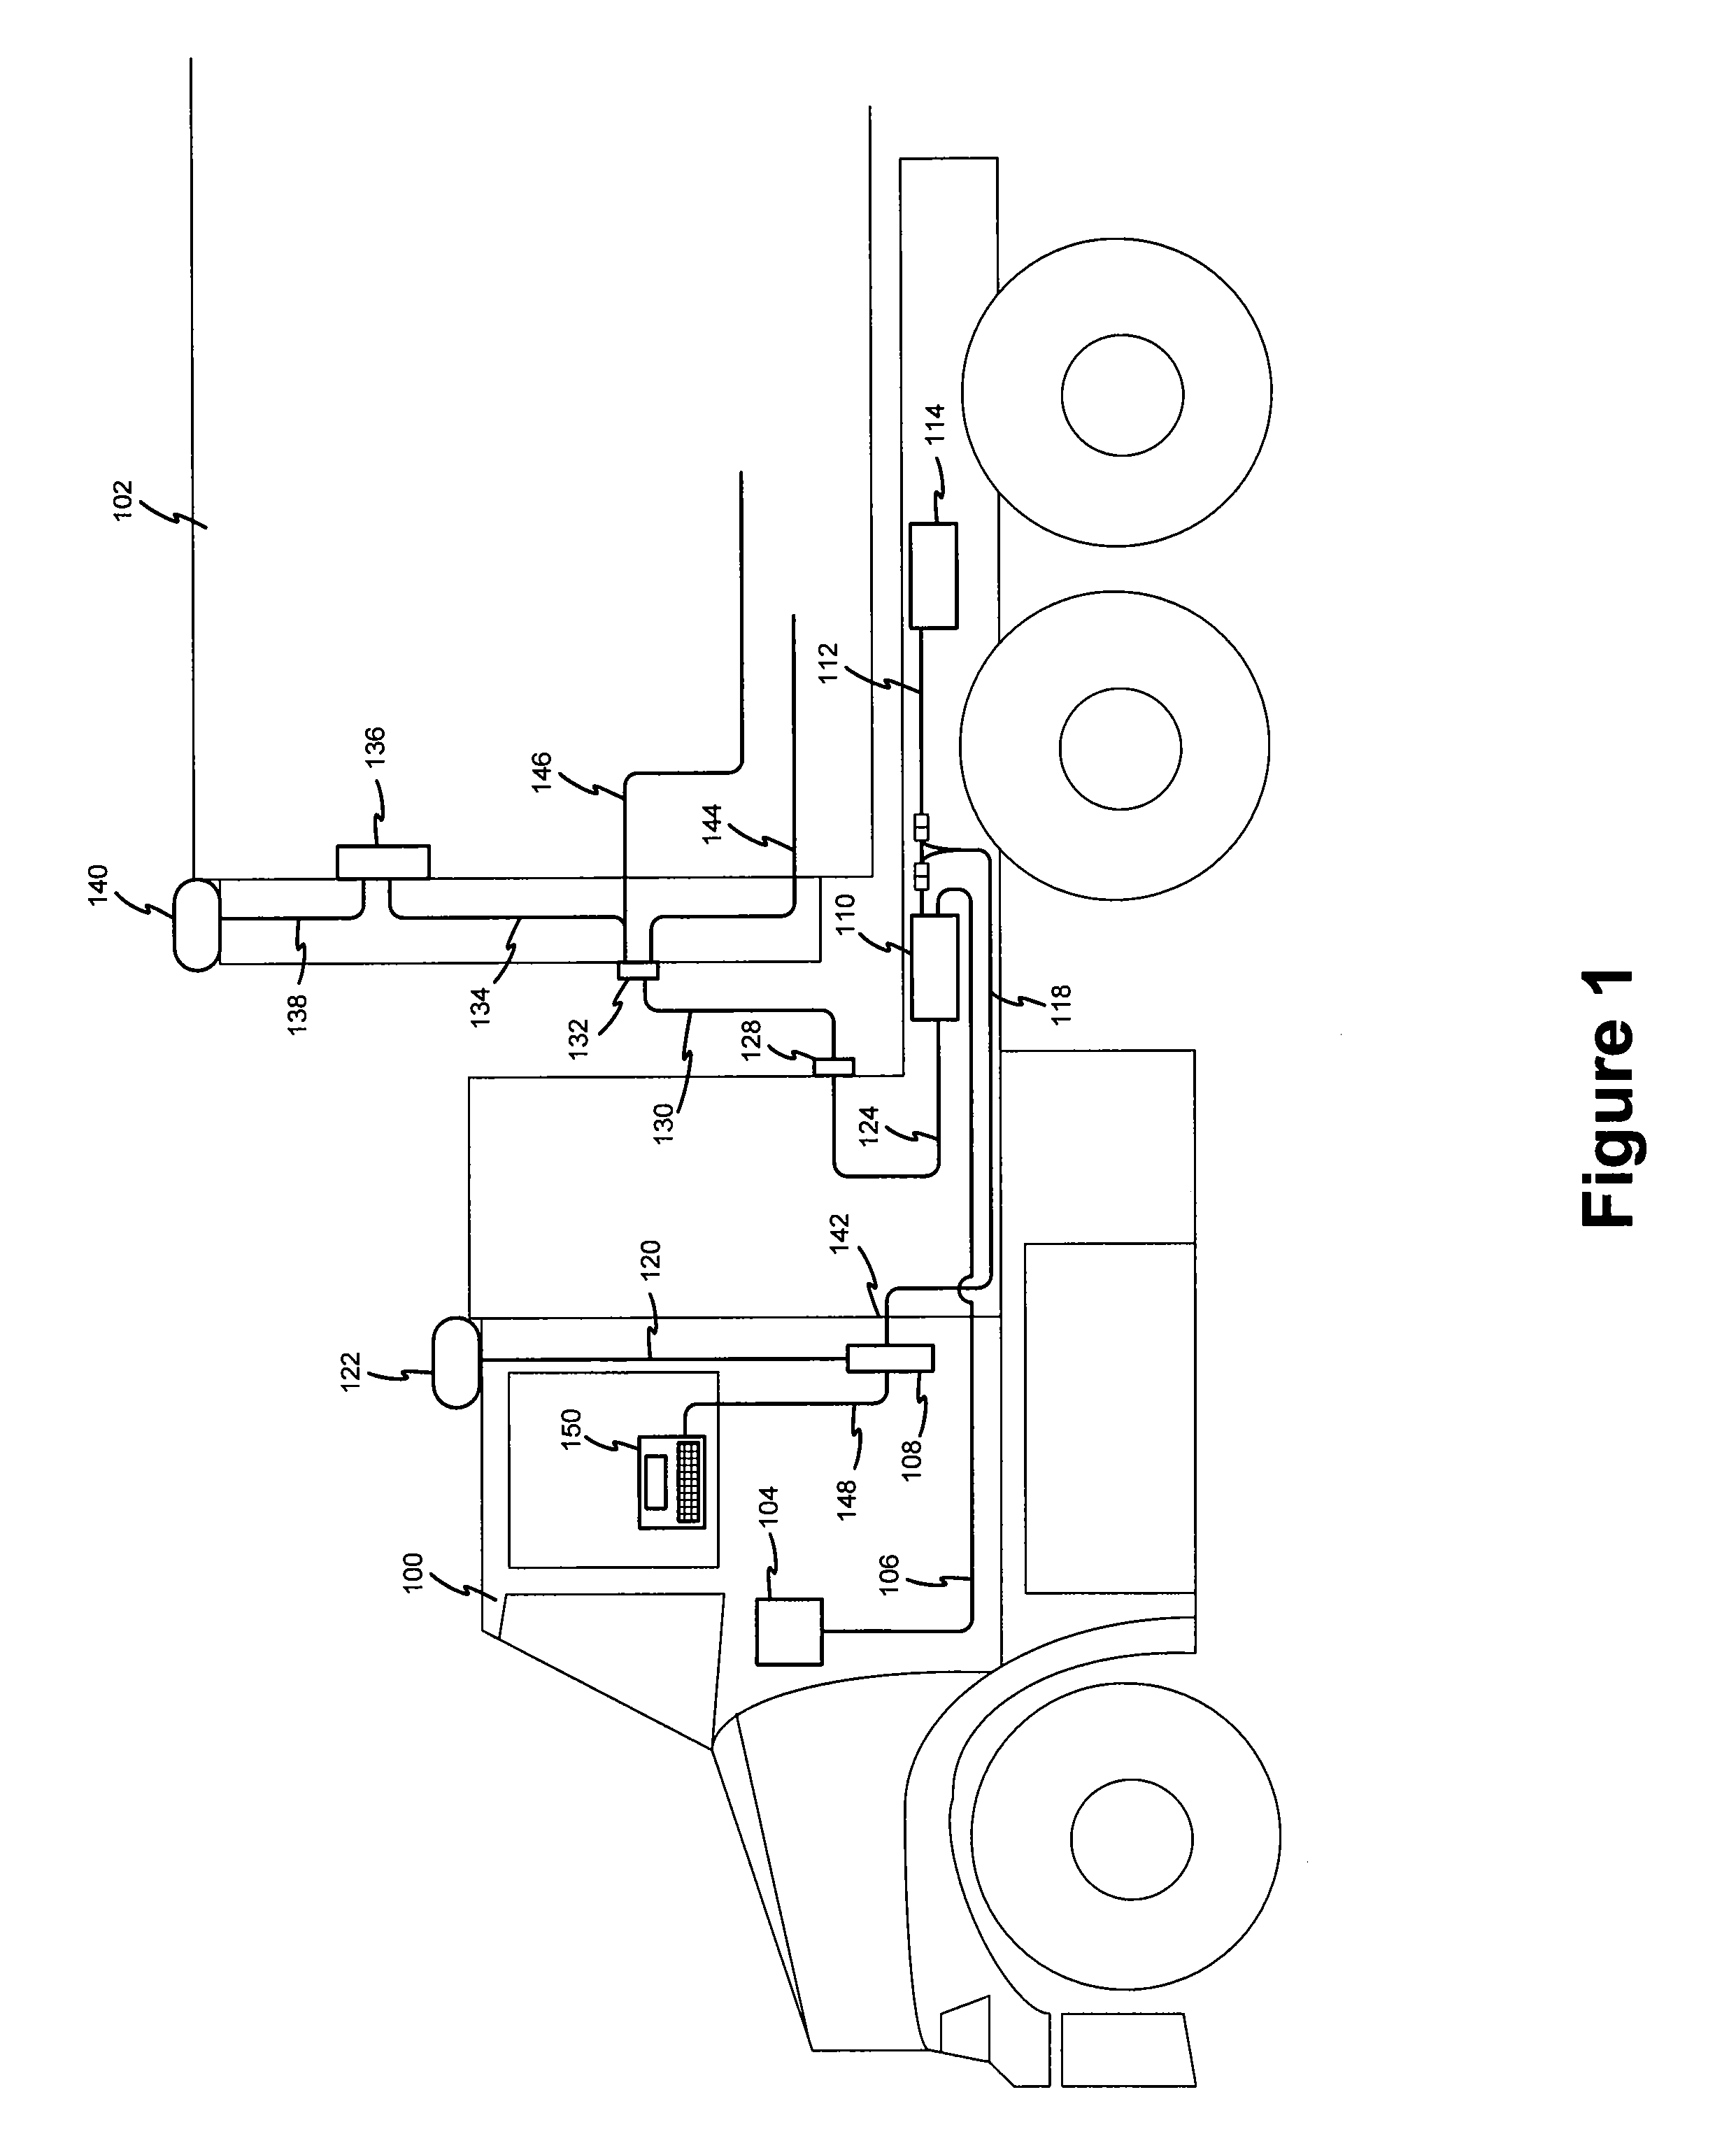 System, method and device for retrofitting tractor-trailer communications systems